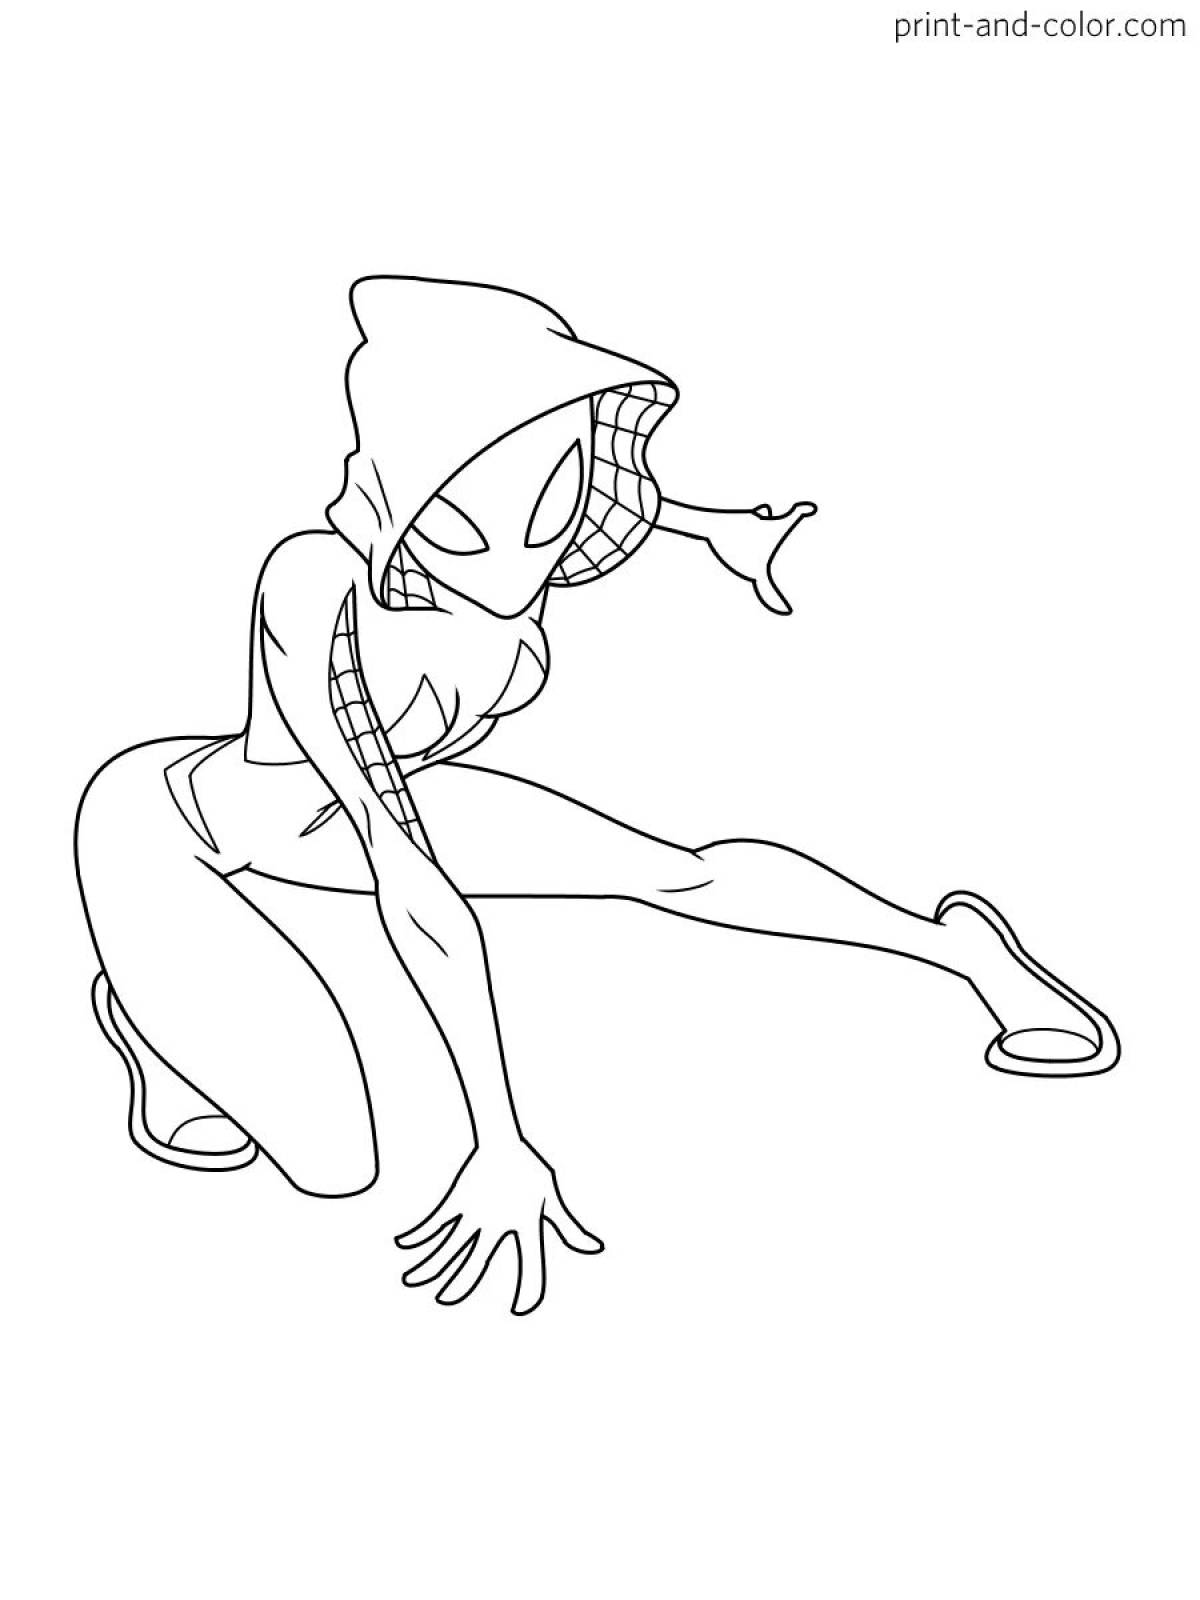 Coloring page charming girl with spider-man